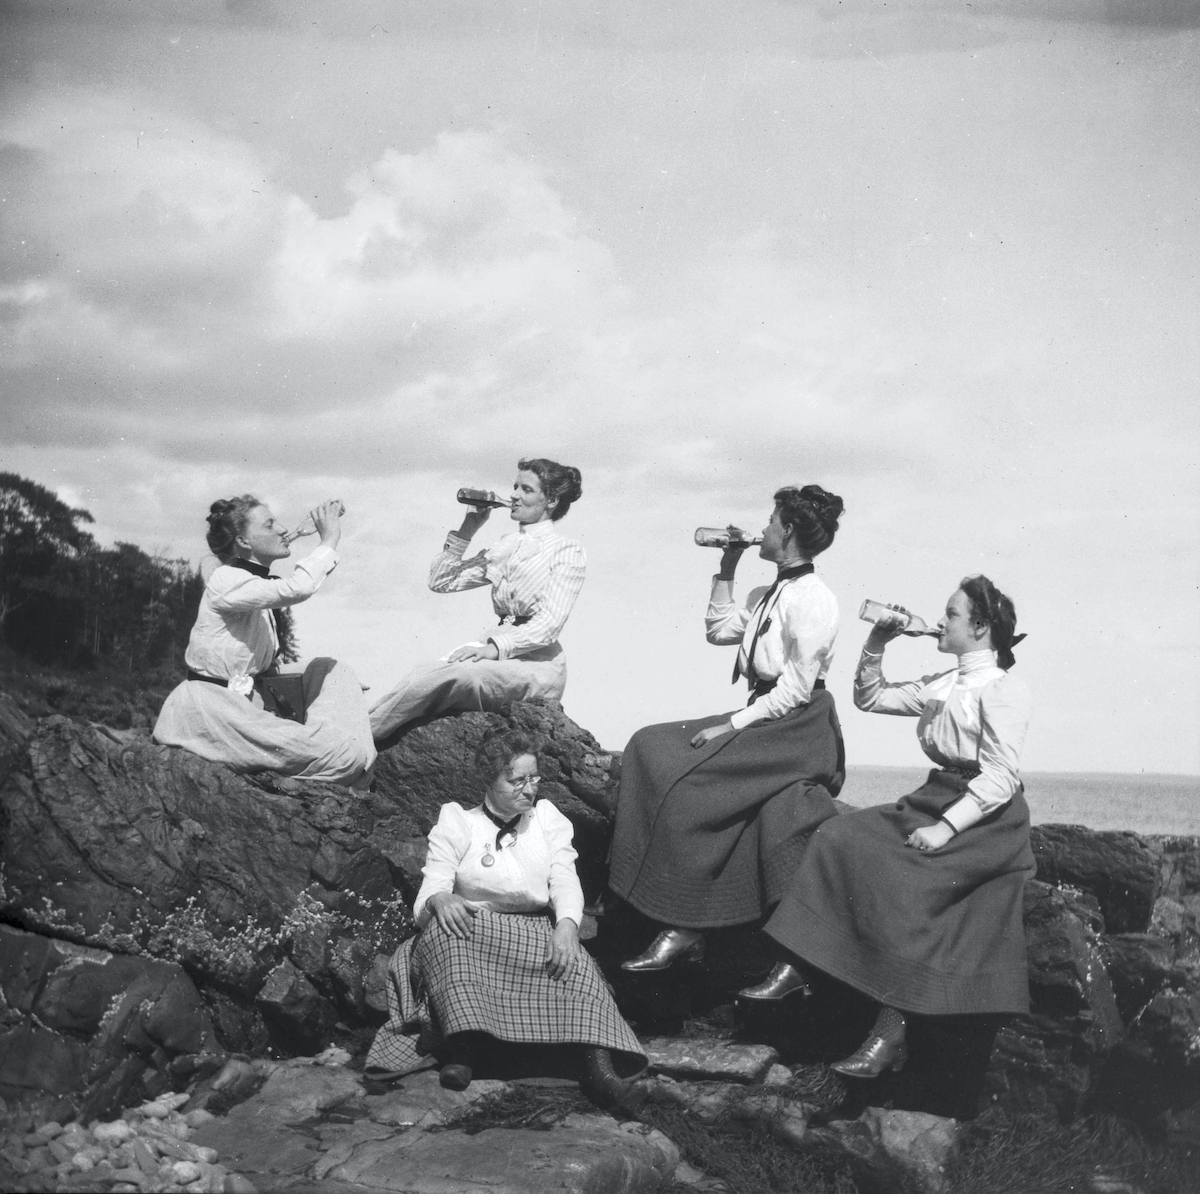 Picnic-at-Shermans-Point-1900.-Theresa-is-2nd-from-the-left-holding-a-bottle..jpeg